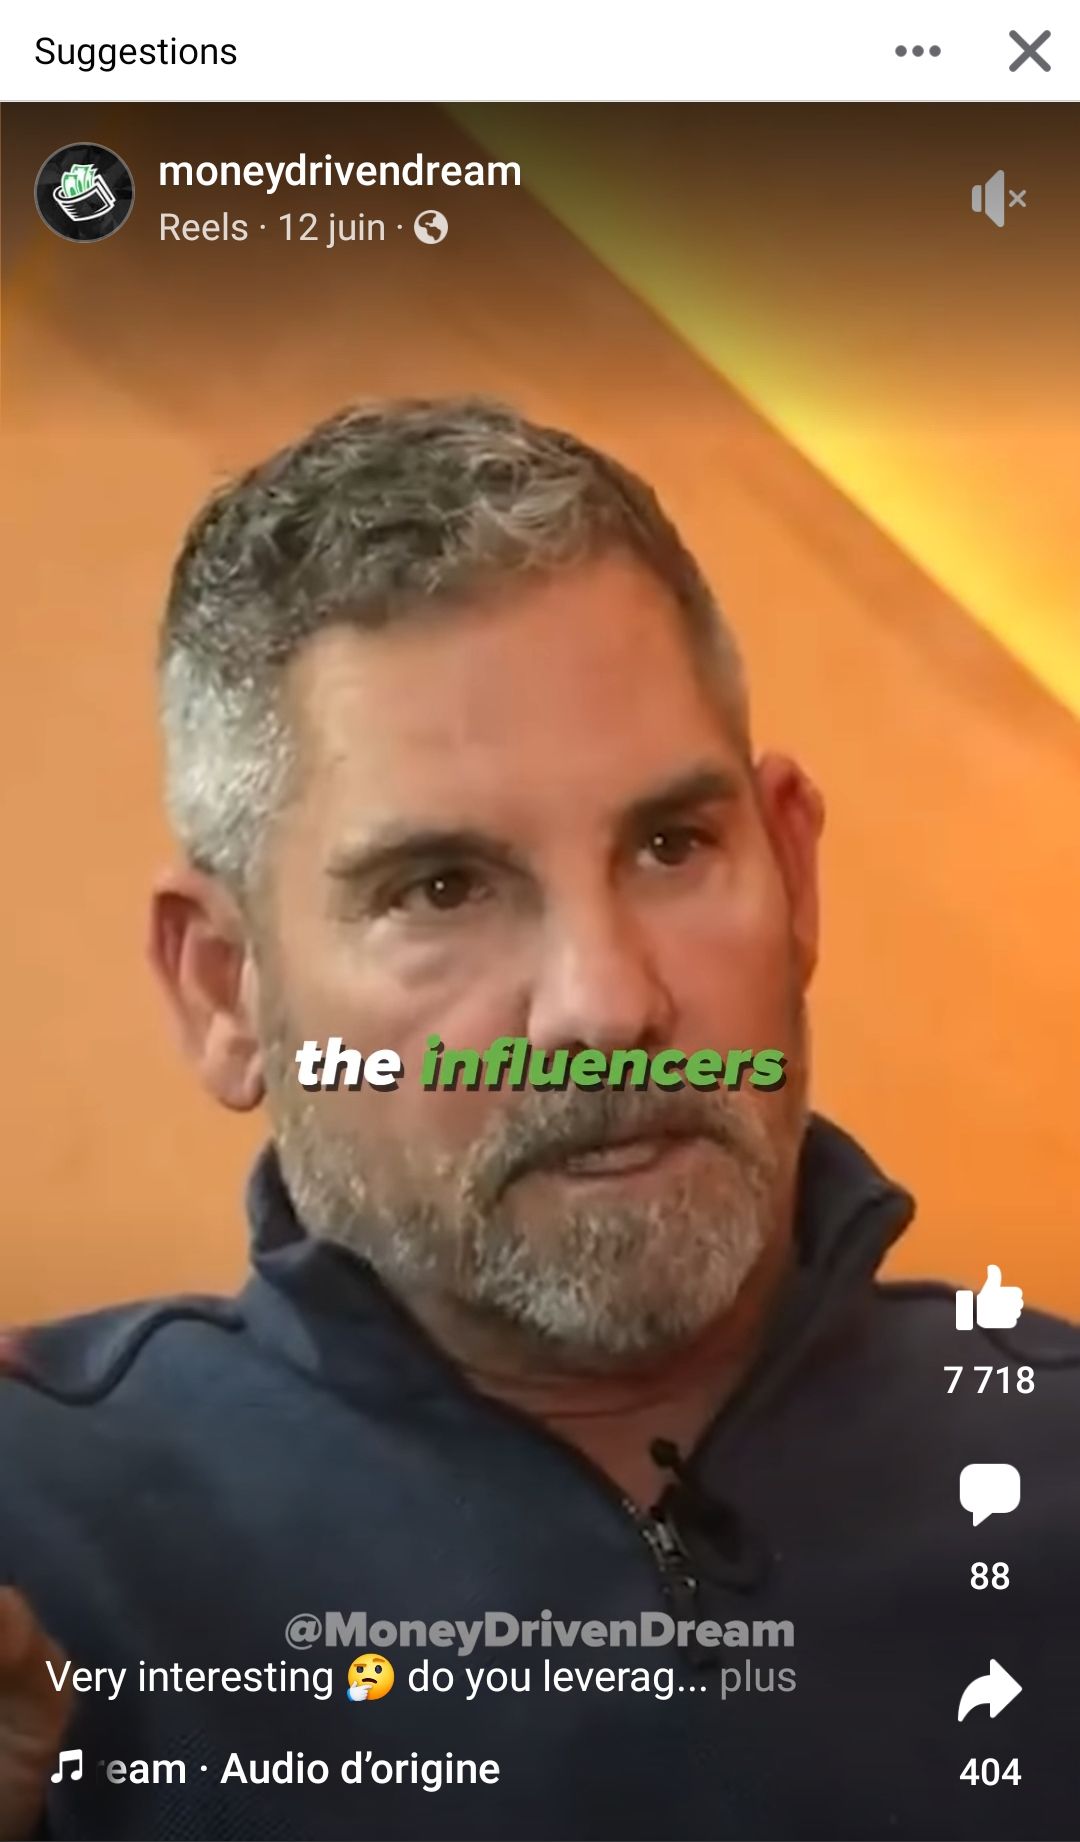 Screnshot of a guy talking about influencers